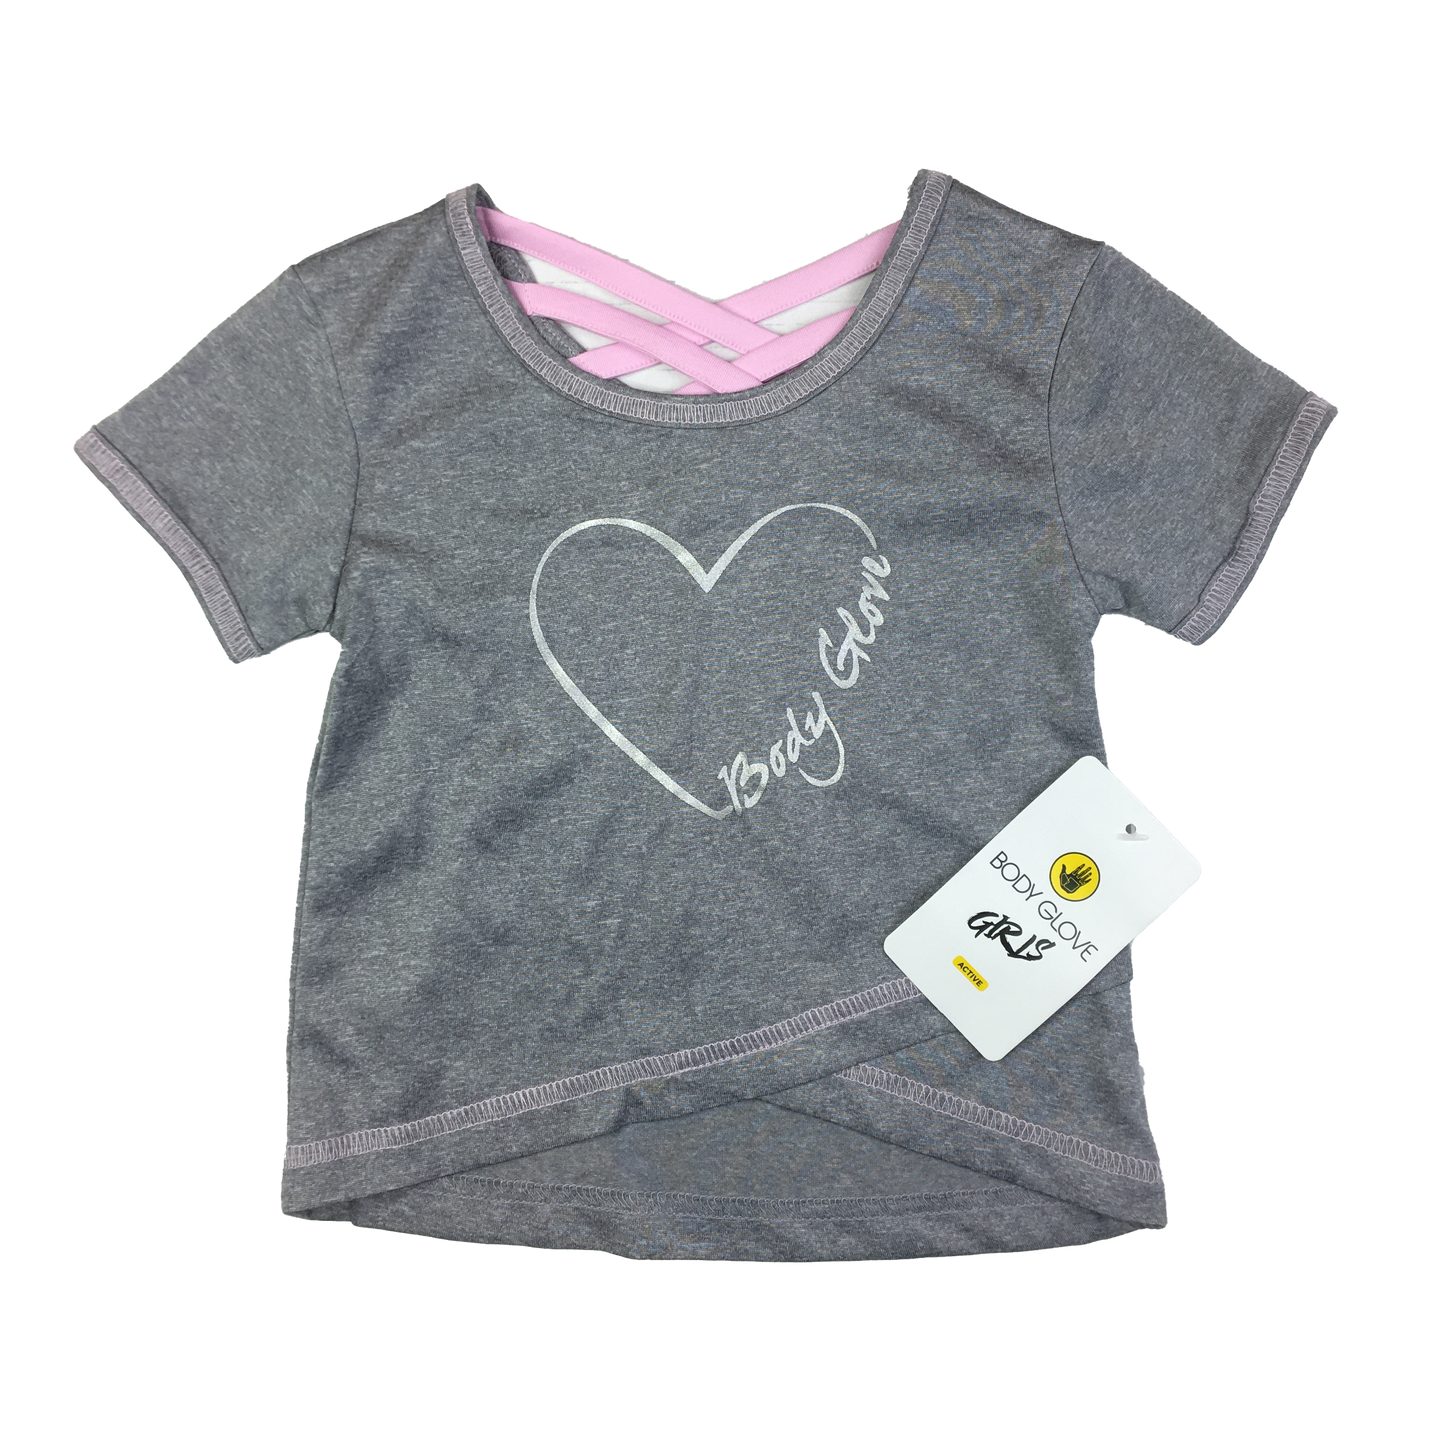 Body Glove Grey T-Shirt with Heart 18M